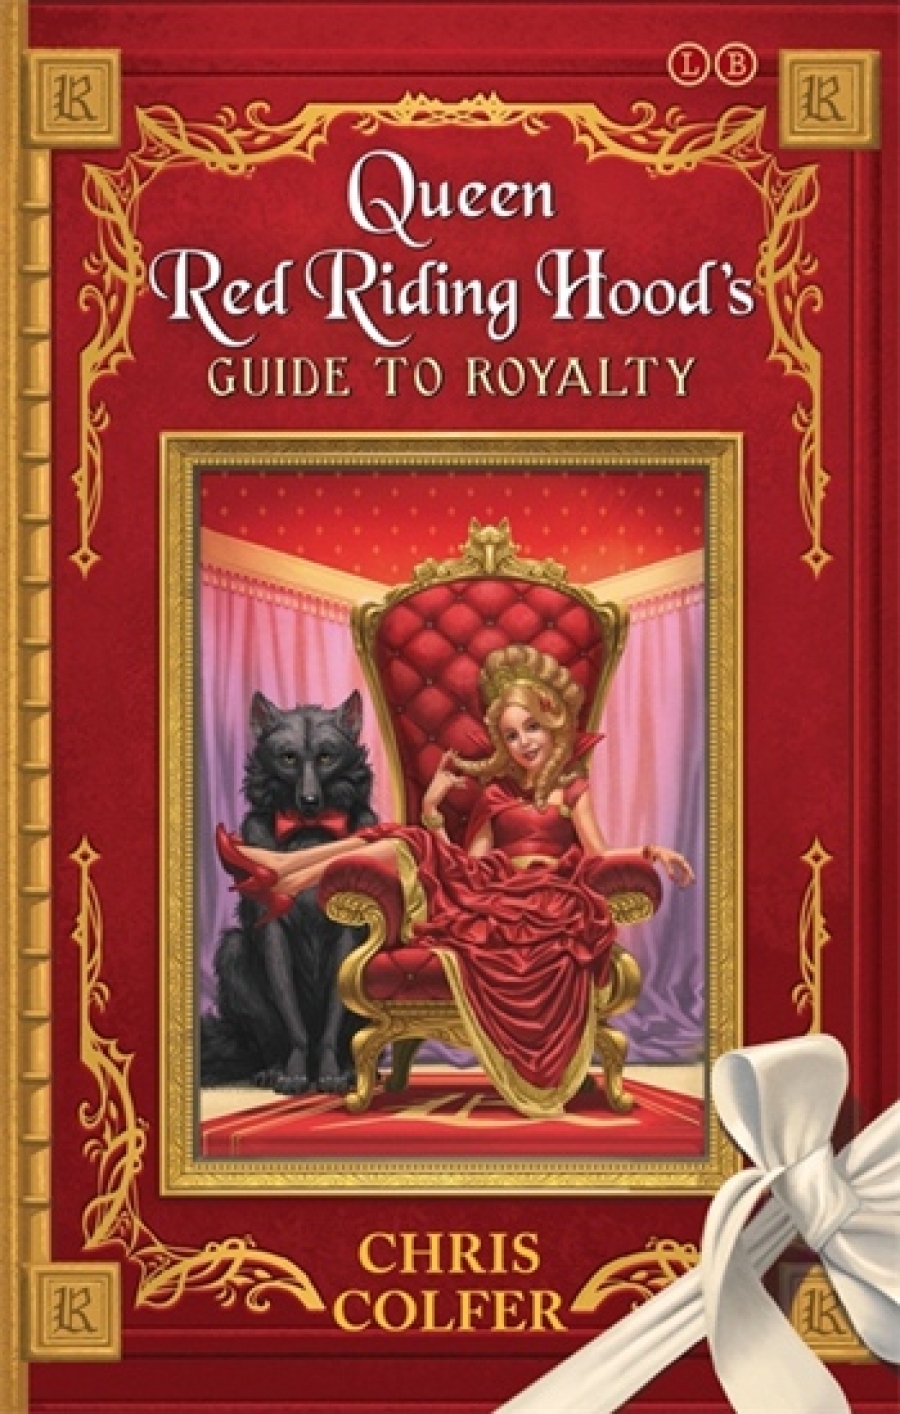 Colfer Chris Queen Red Riding Hood's Guide to Royalty 